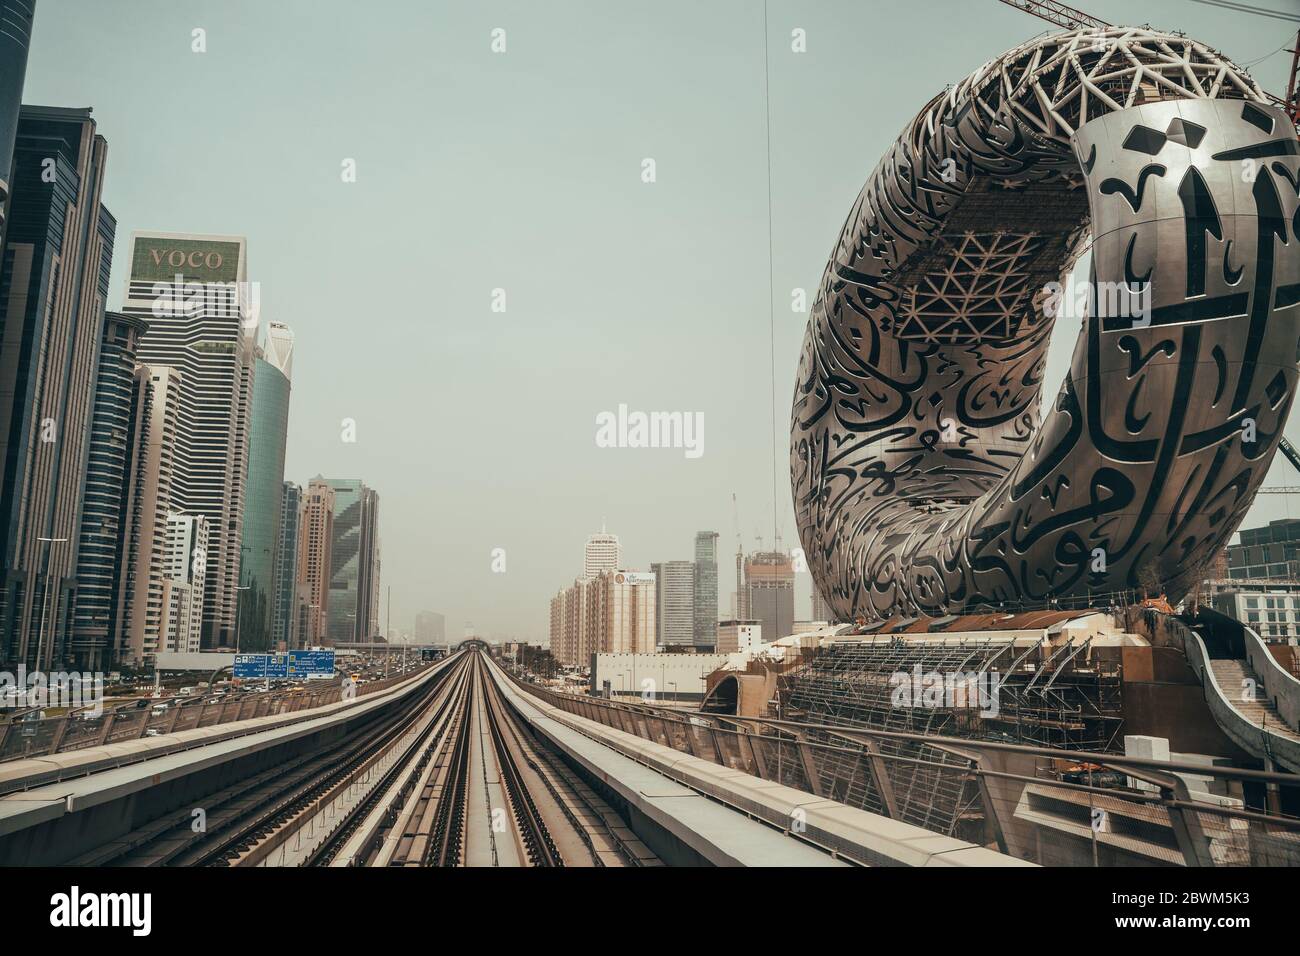 Dubai, UAE - February 2020 : The Museum Of The Future is visionary cultural institution currently under construction in Dubai, UAE. Museum of Innovation and Design. Stock Photo